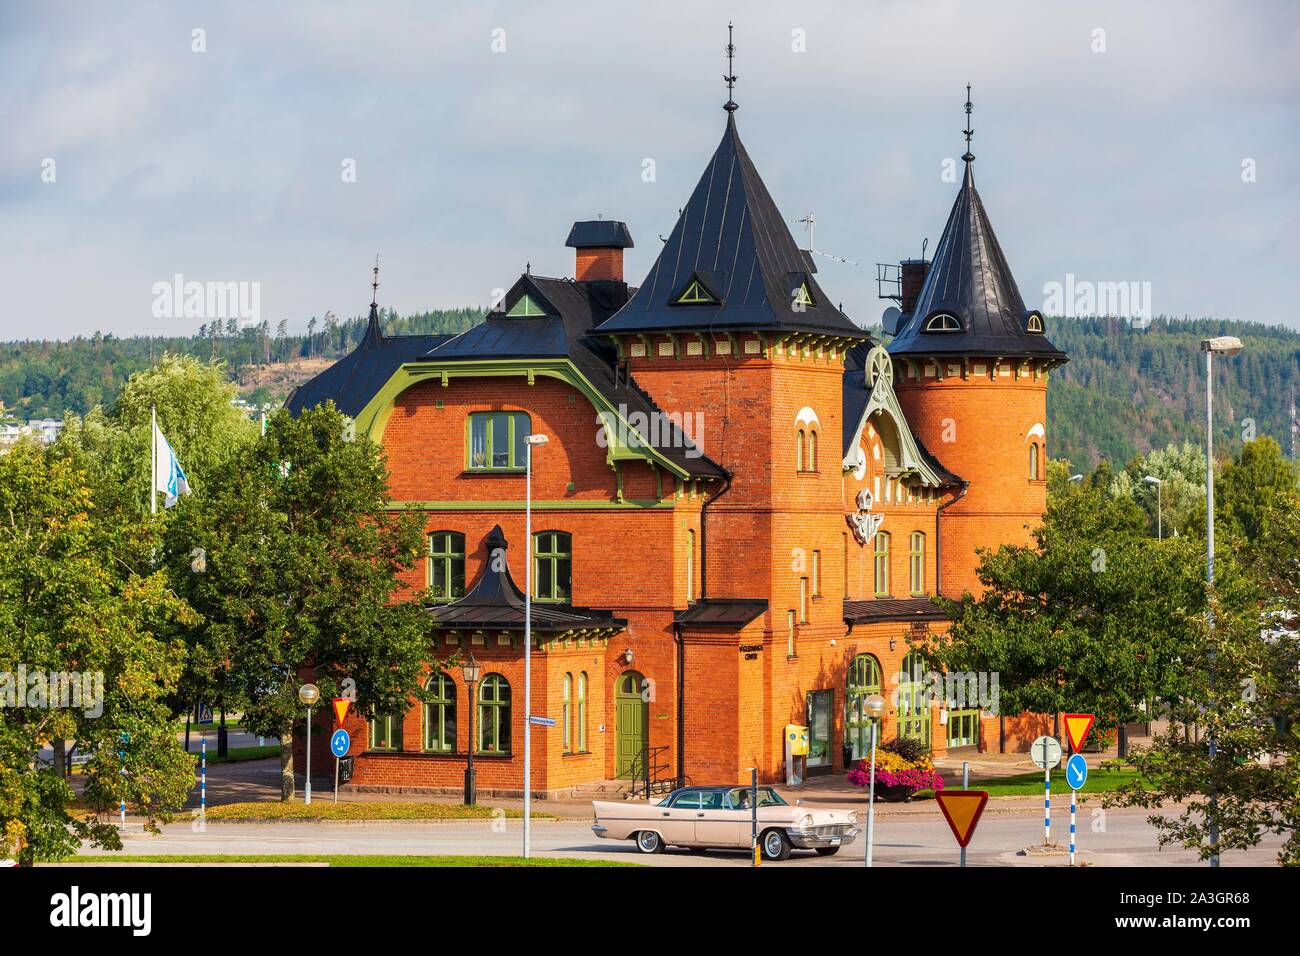 Sweden, County of Vastra Gotaland, Ulricehamn, old train station Stock Photo